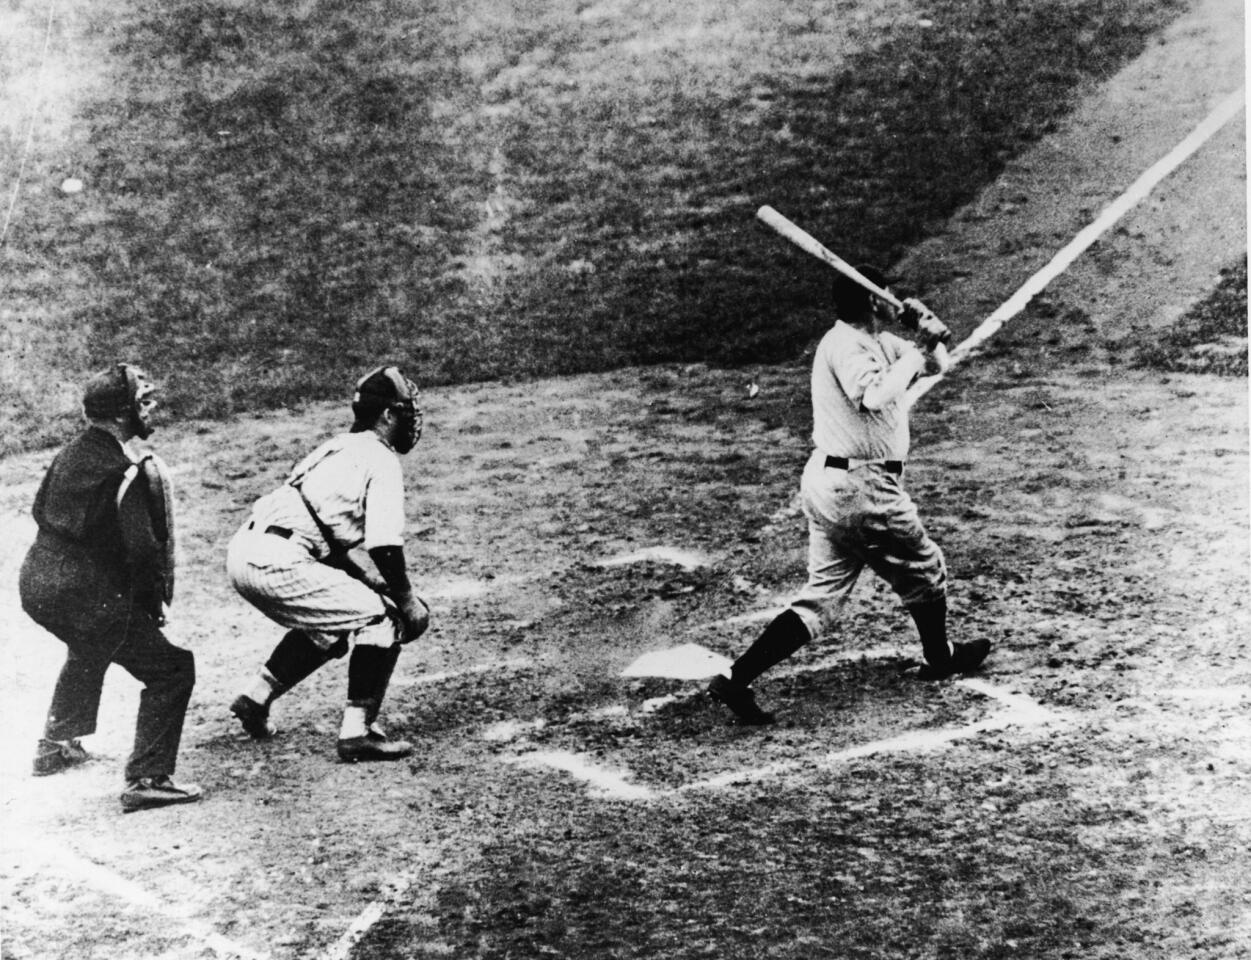 Legendary baseball player Babe Ruth, of the New York Yankees, hits a home run in the third game of the World Series against the Chicago Cubs at Wrigley Field on Oct. 1, 1932. It was during this game that Ruth gestured with his bat before hitting a home run giving birth to the legend of the 'Called Shot.'